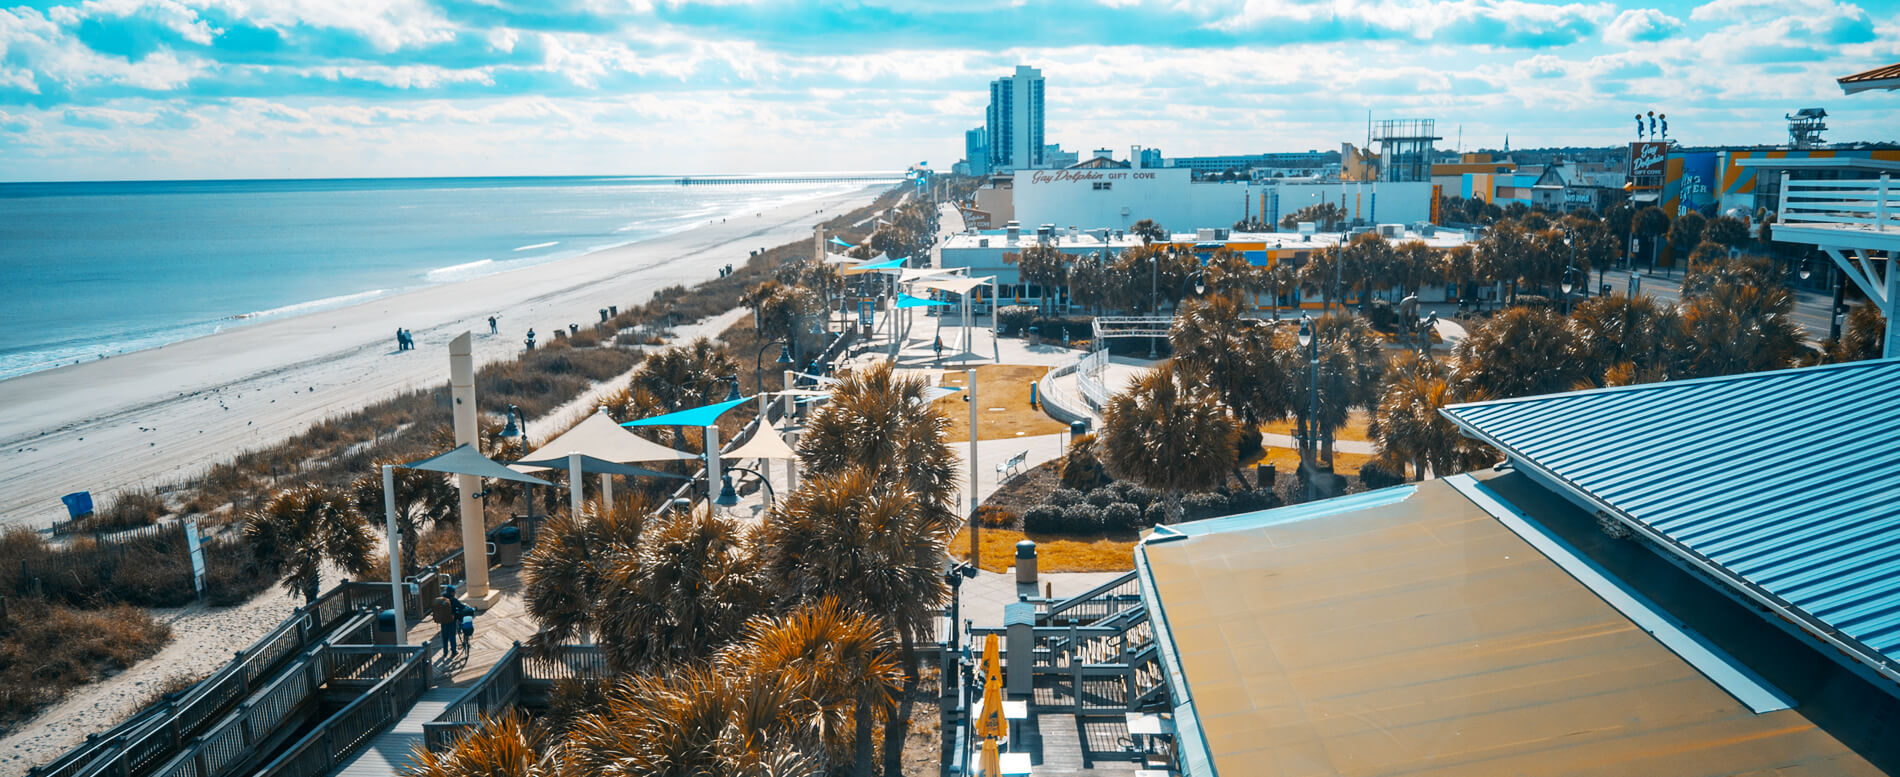 Things to do in Myrtle Beach, South Carolina